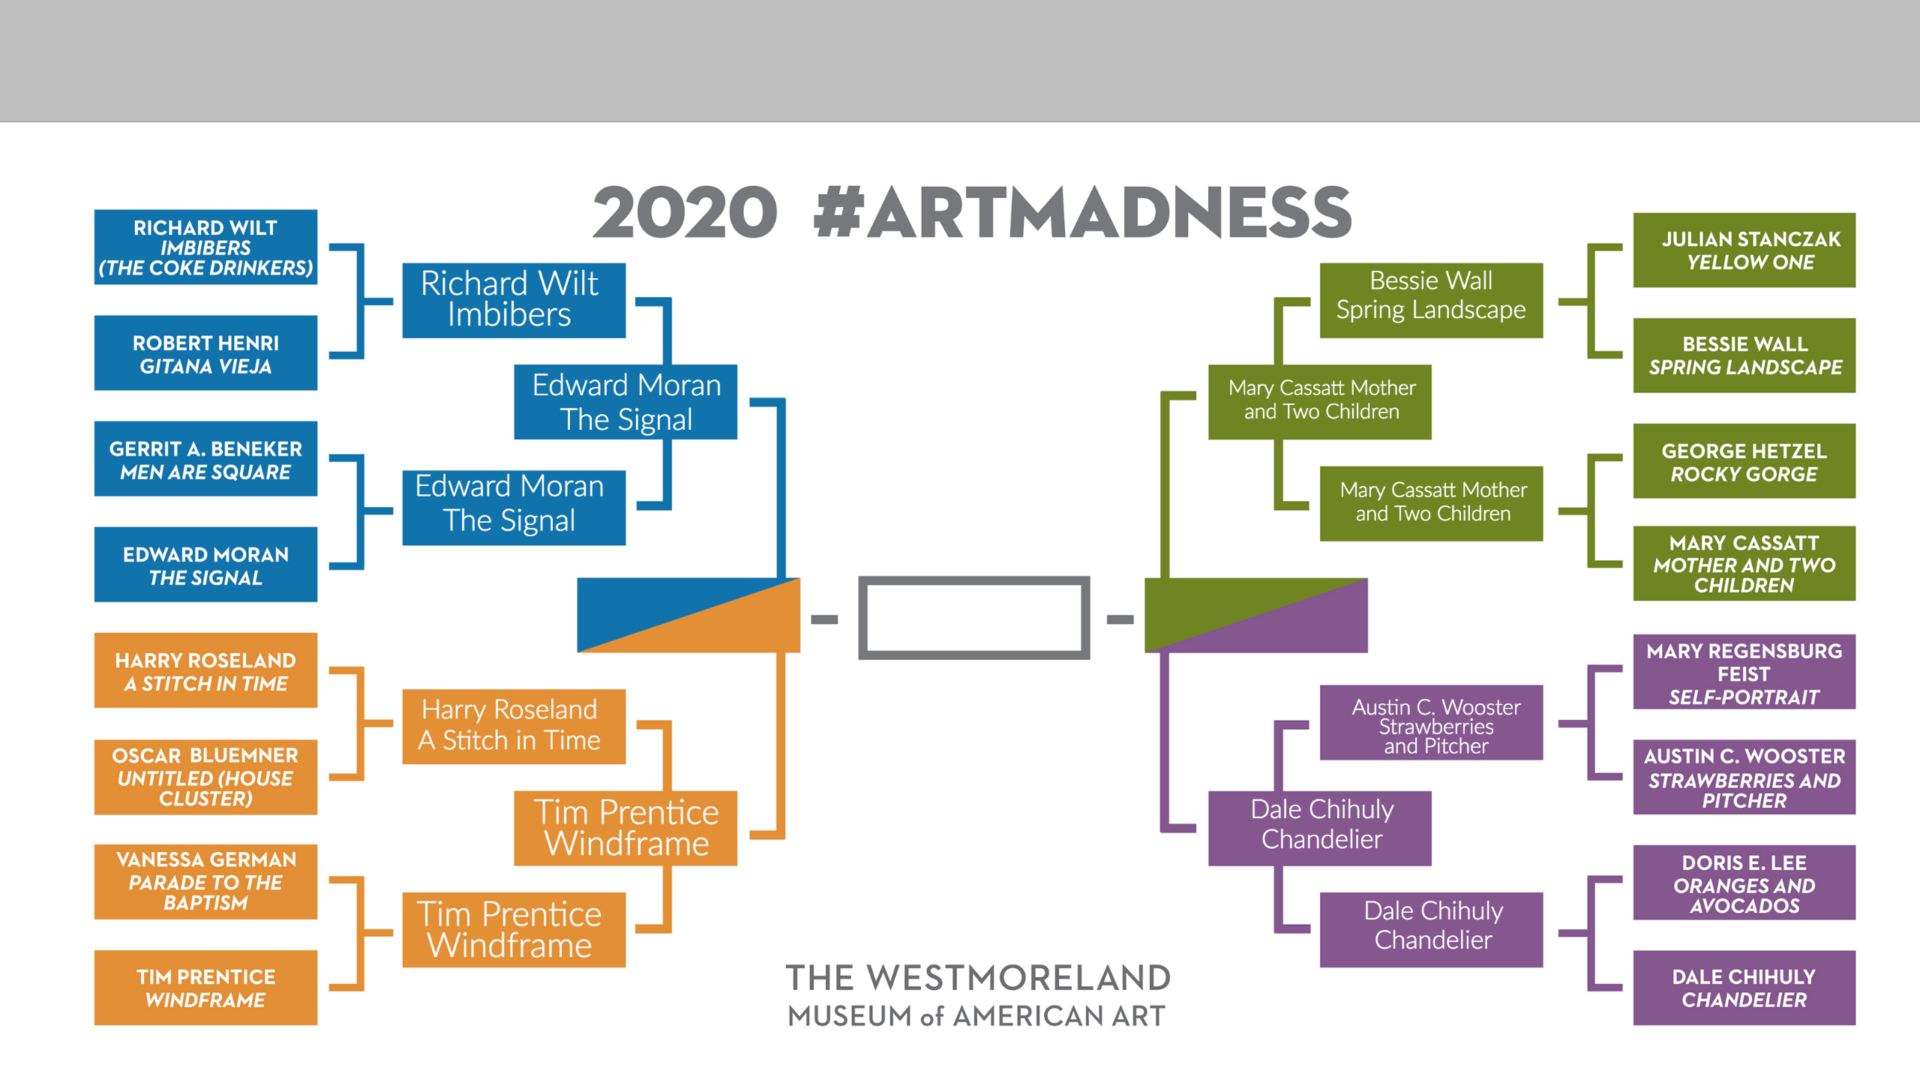 https://thewestmoreland.org/wp-content/uploads/2022/04/Art-Madness-Bracket2-1920x1080.png